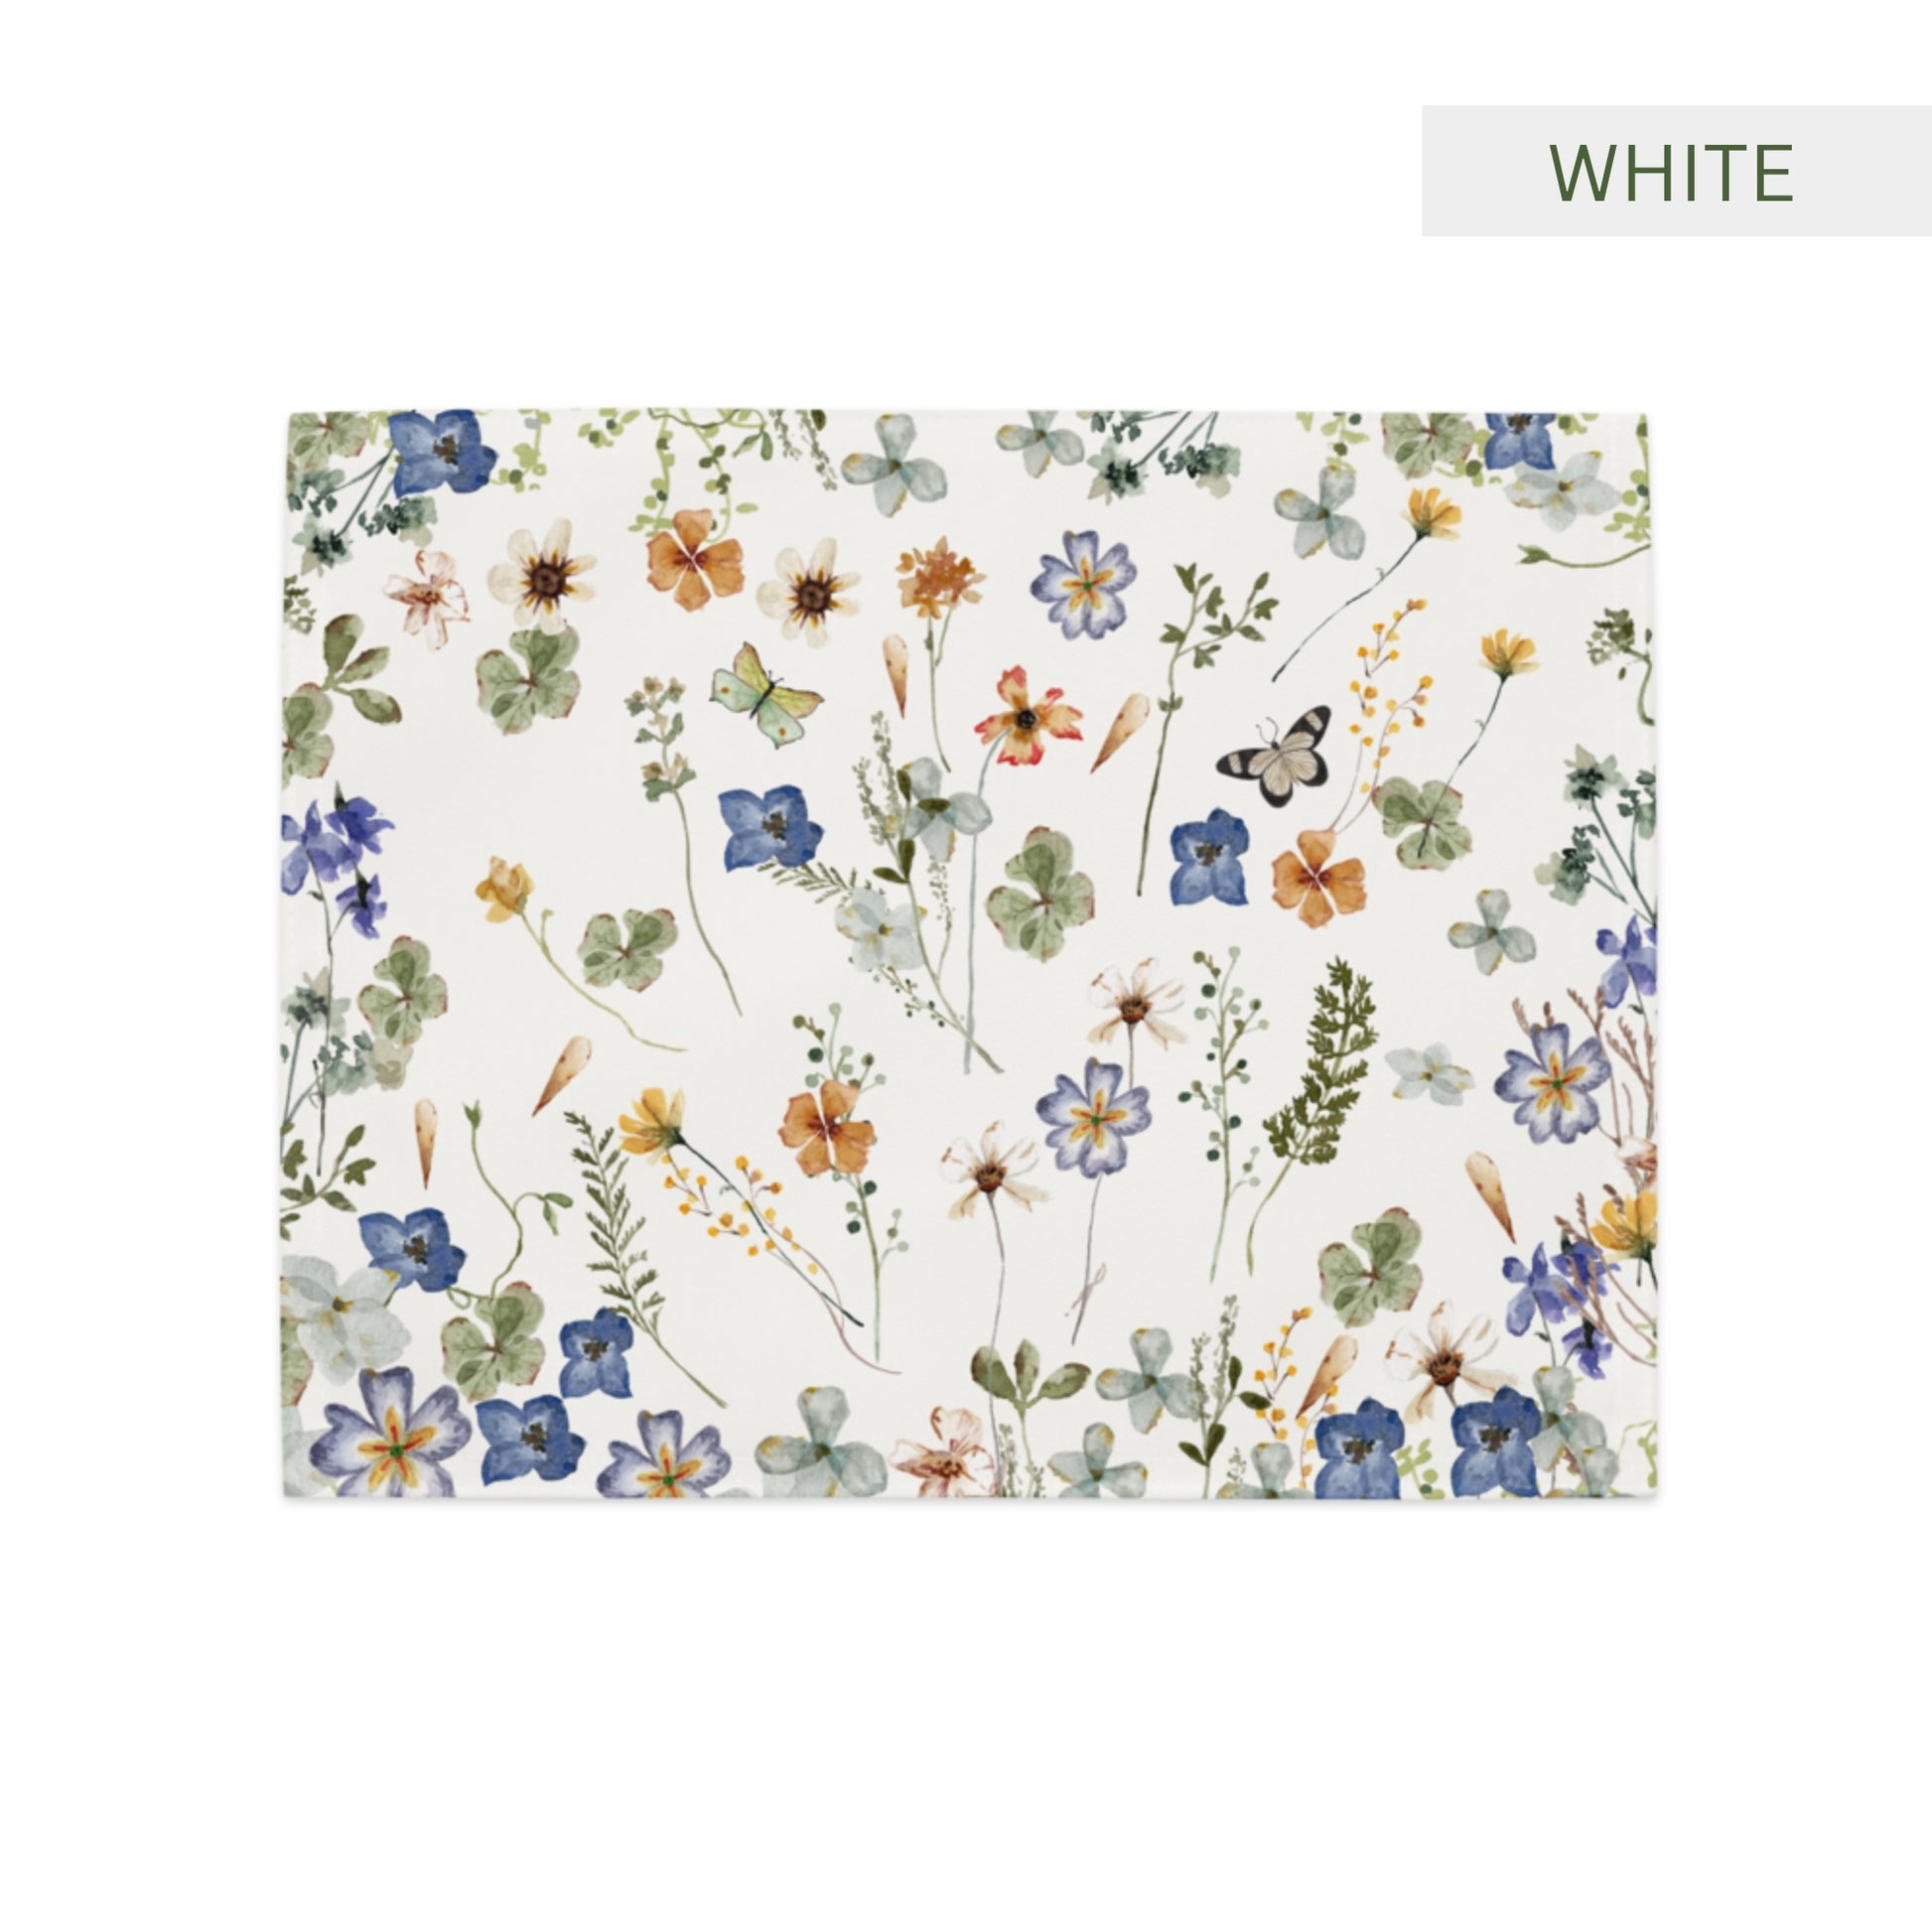 Wildflowers Floral PLACEMAT - White Tone from BLUE WATER SONGS